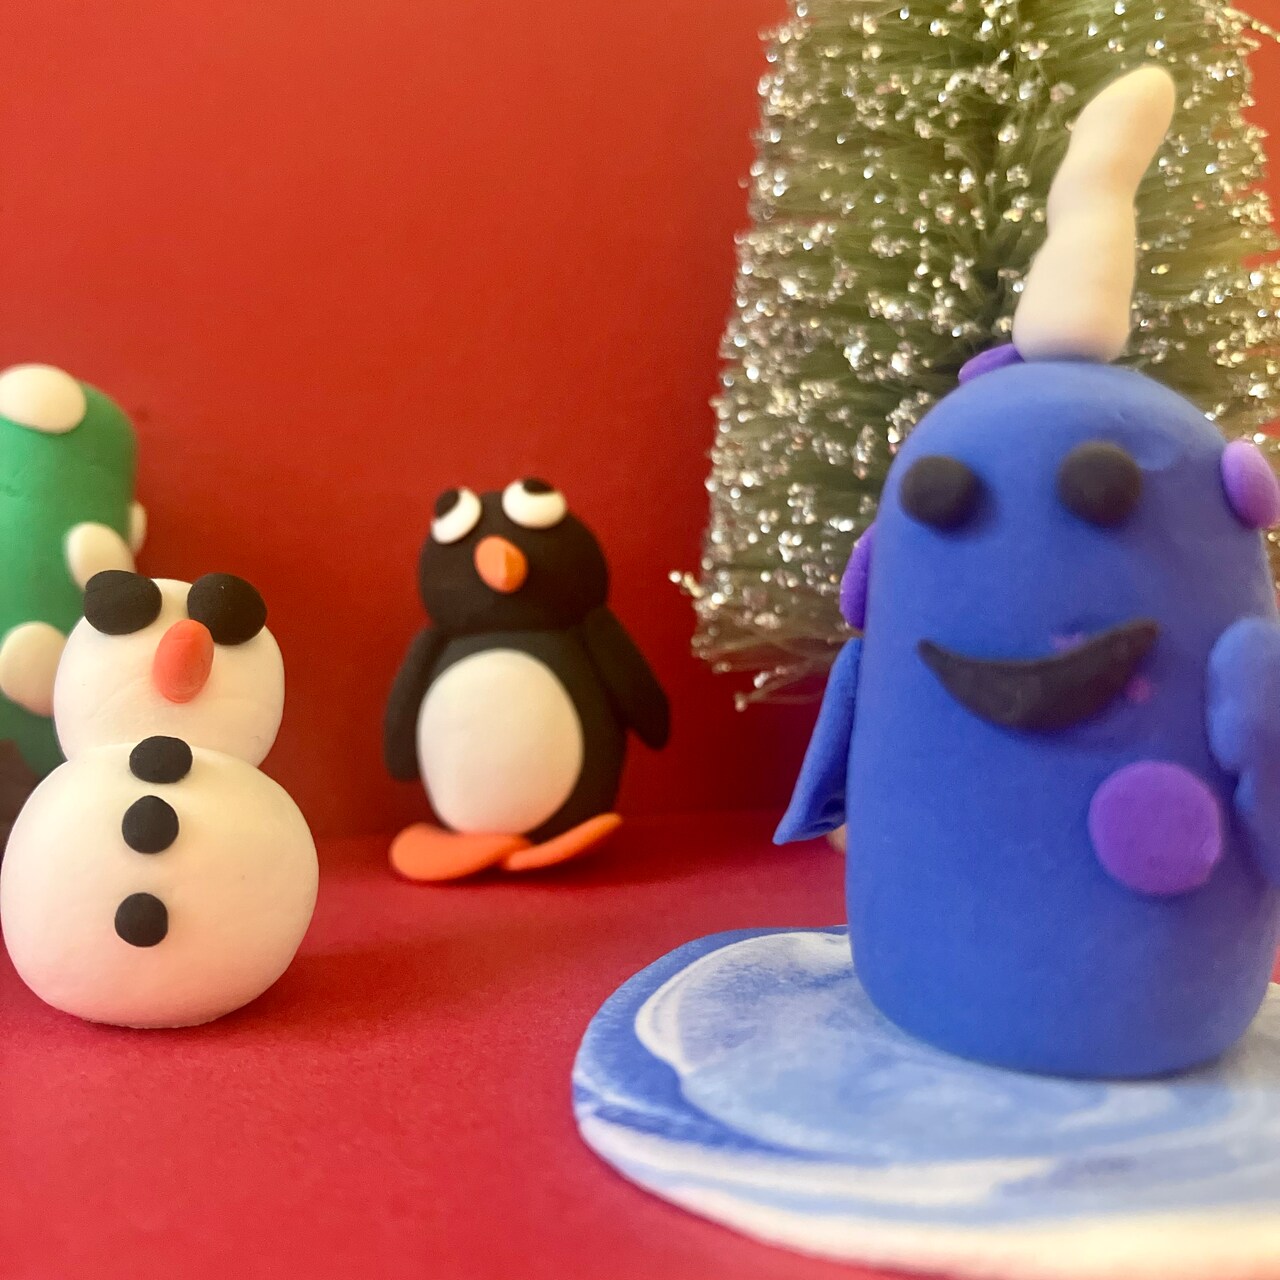 Kids Club: Making Winter Friends with Clay with Elizabeth Barrick